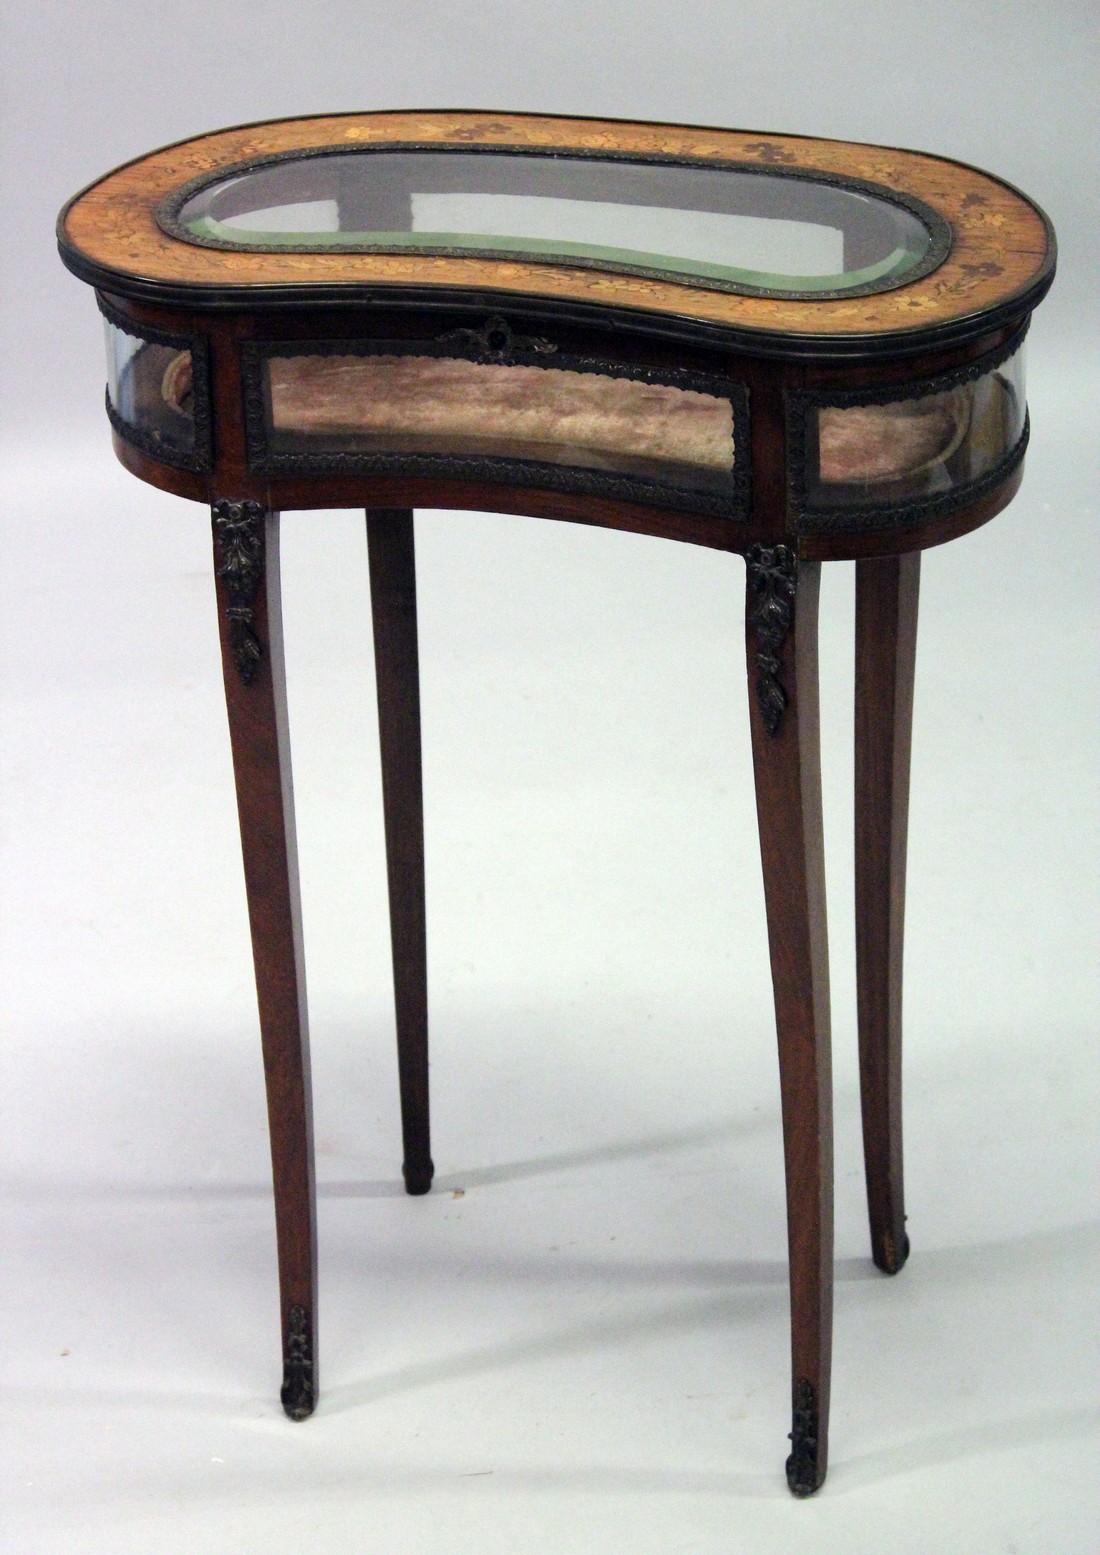 A GOOD 19TH CENTURY FRENCH ROSEWOOD AND MARQUETRY KIDNEY SHAPED BIJOUTERIE TABLE inlaid with